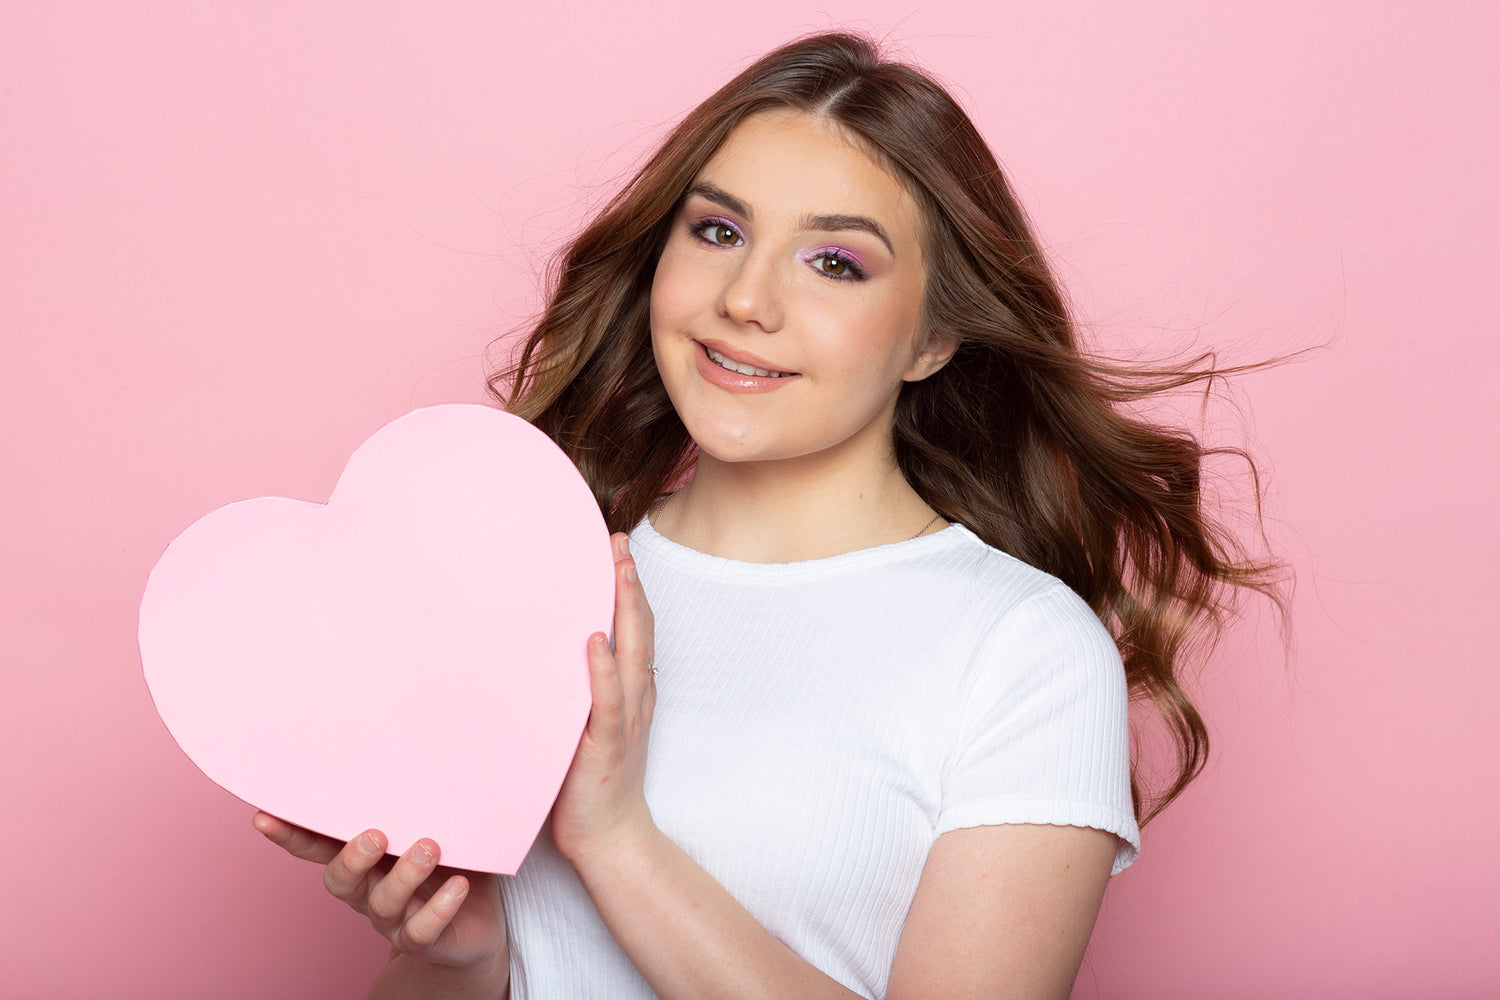 How to Get Piper Rockelle’s Valentine’s Day Look